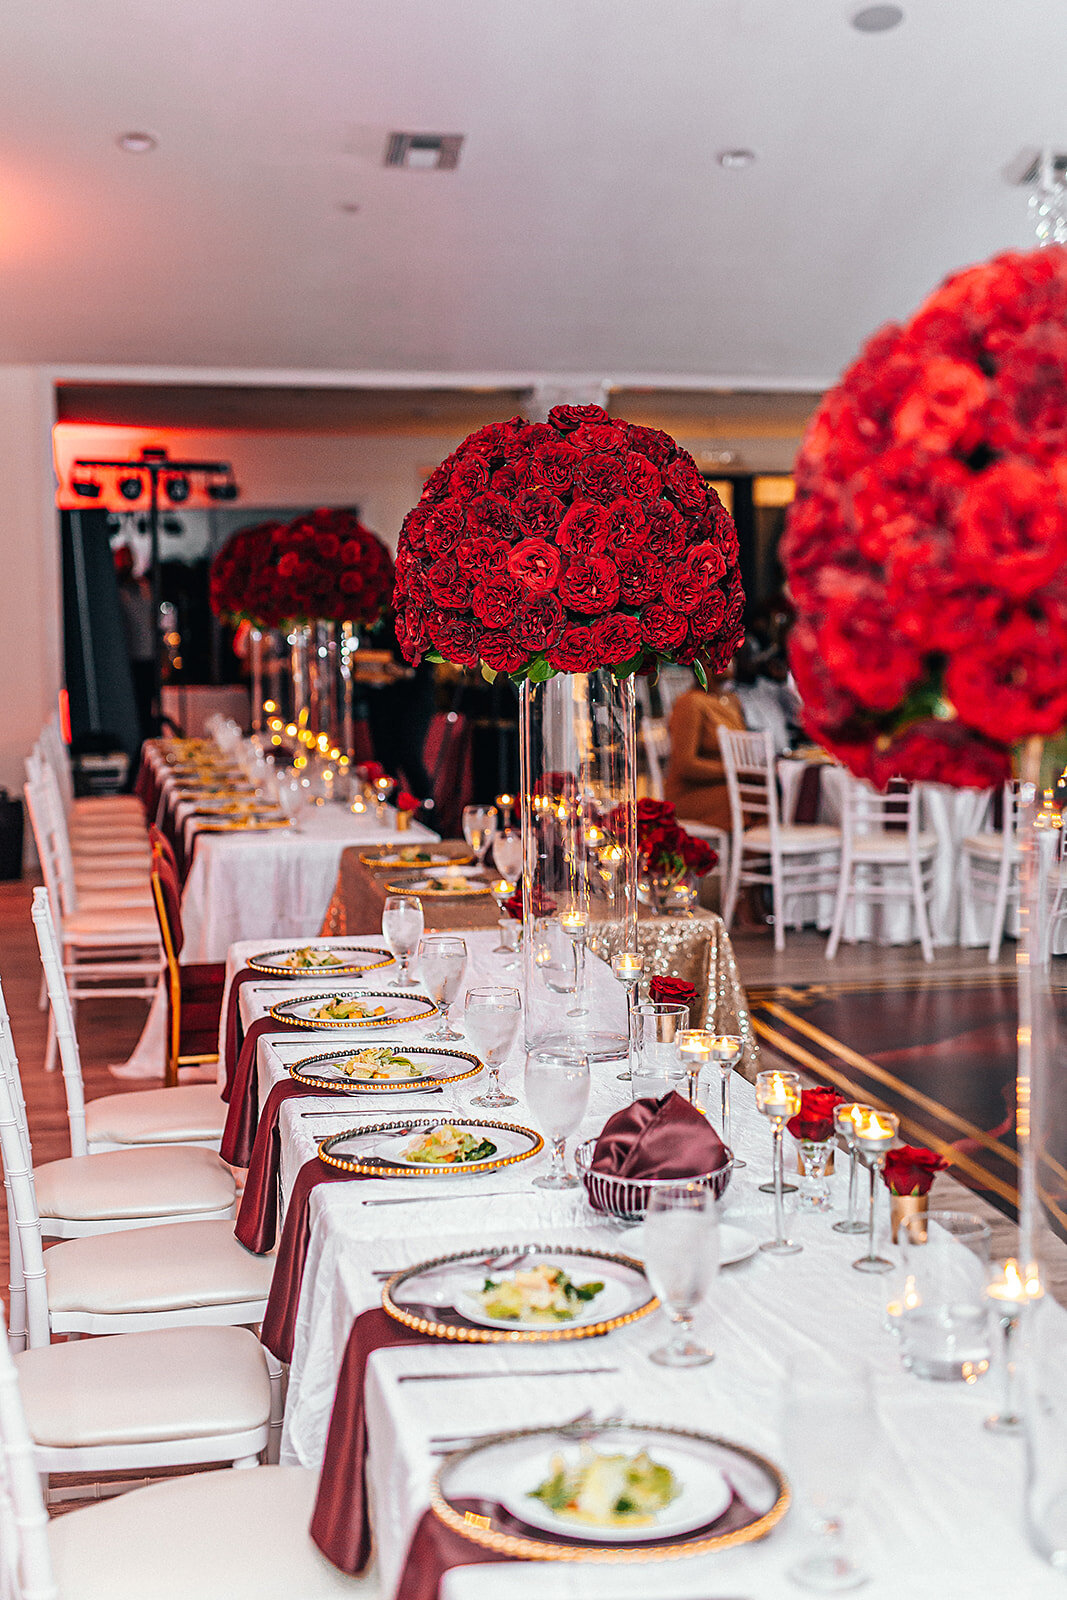 Wedding reception table settings with red roses and candles